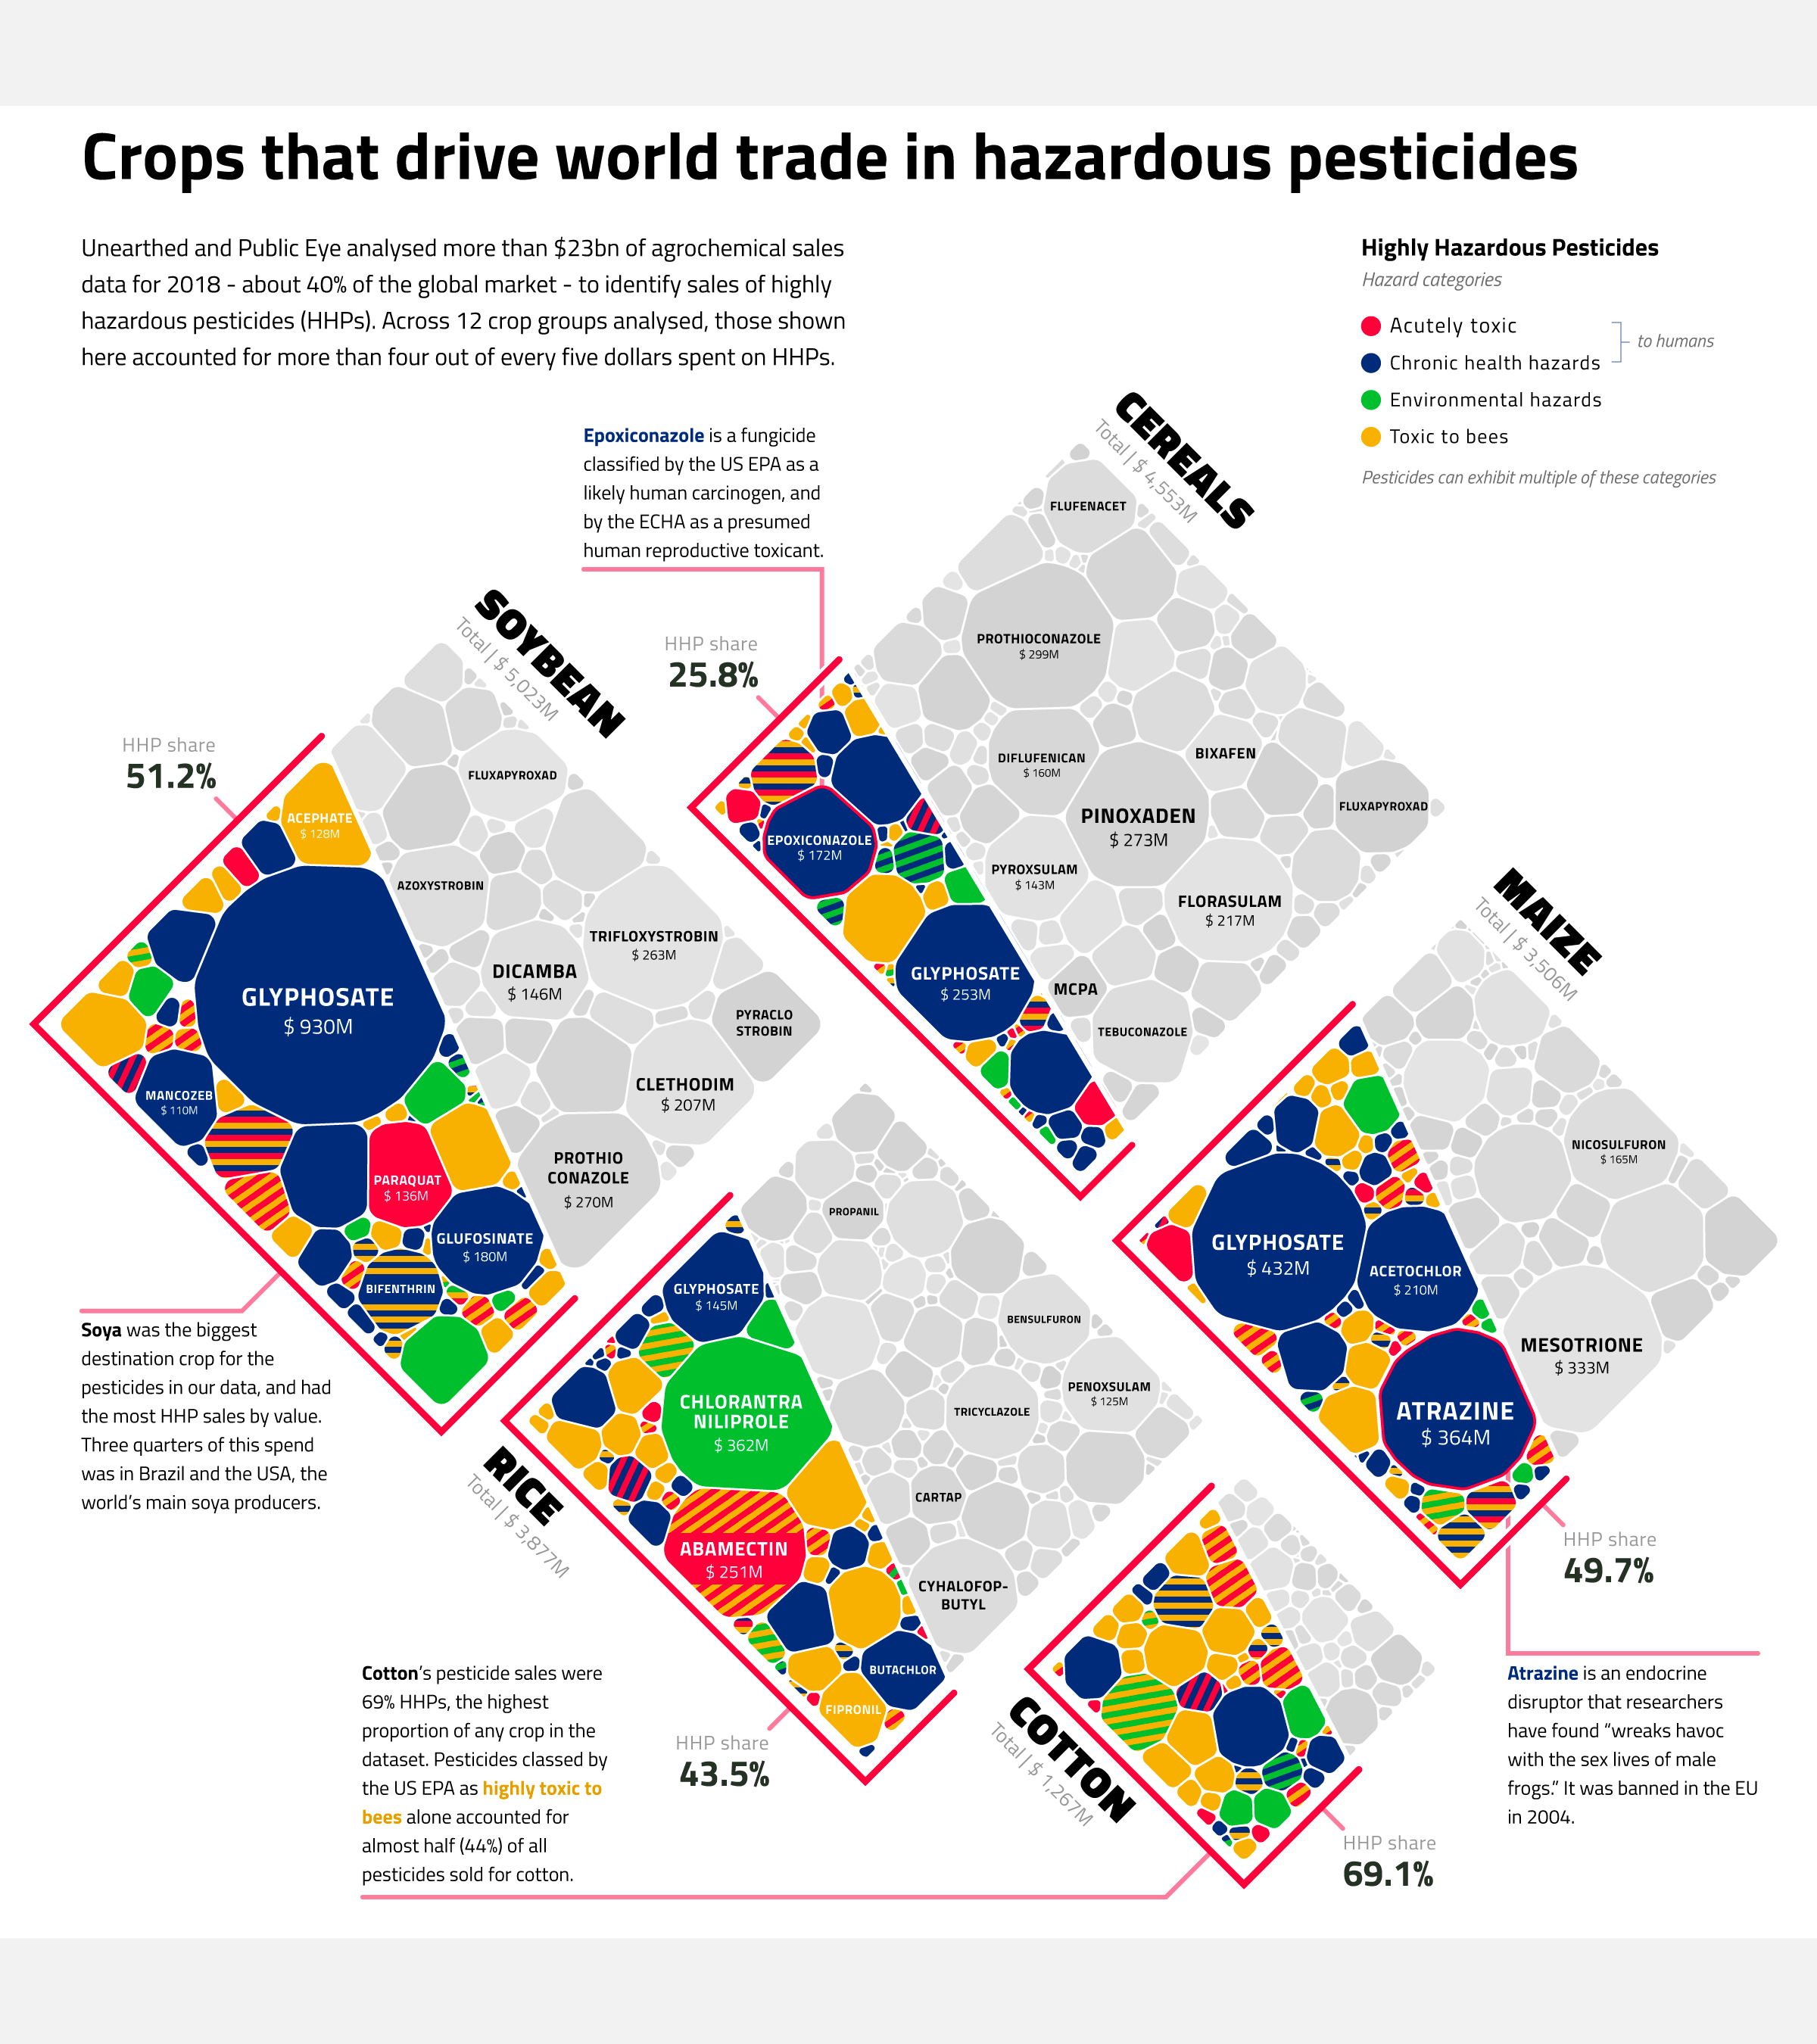 Visualization about the main crops that drive the world trade in hazardous pesticides